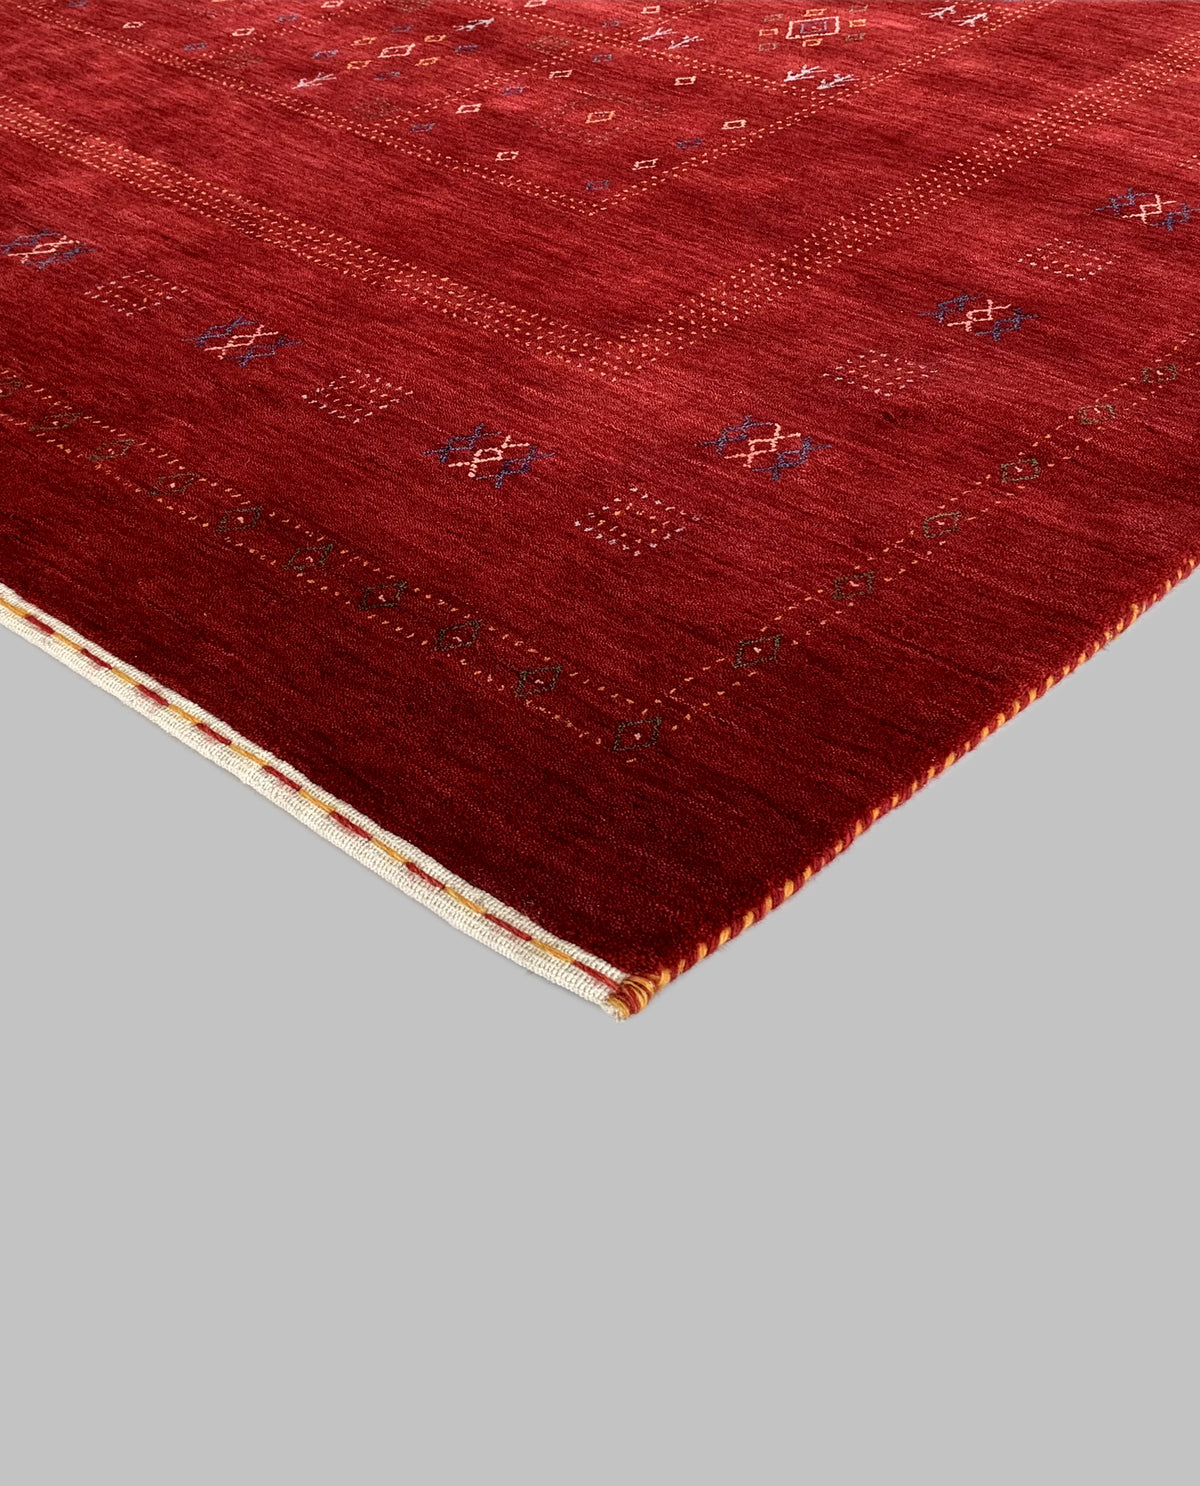 Rugslane Hand Knotted Red Color Modern Design Luxurious GABBEH Thick Pile Carpet 6 ft x 9ft